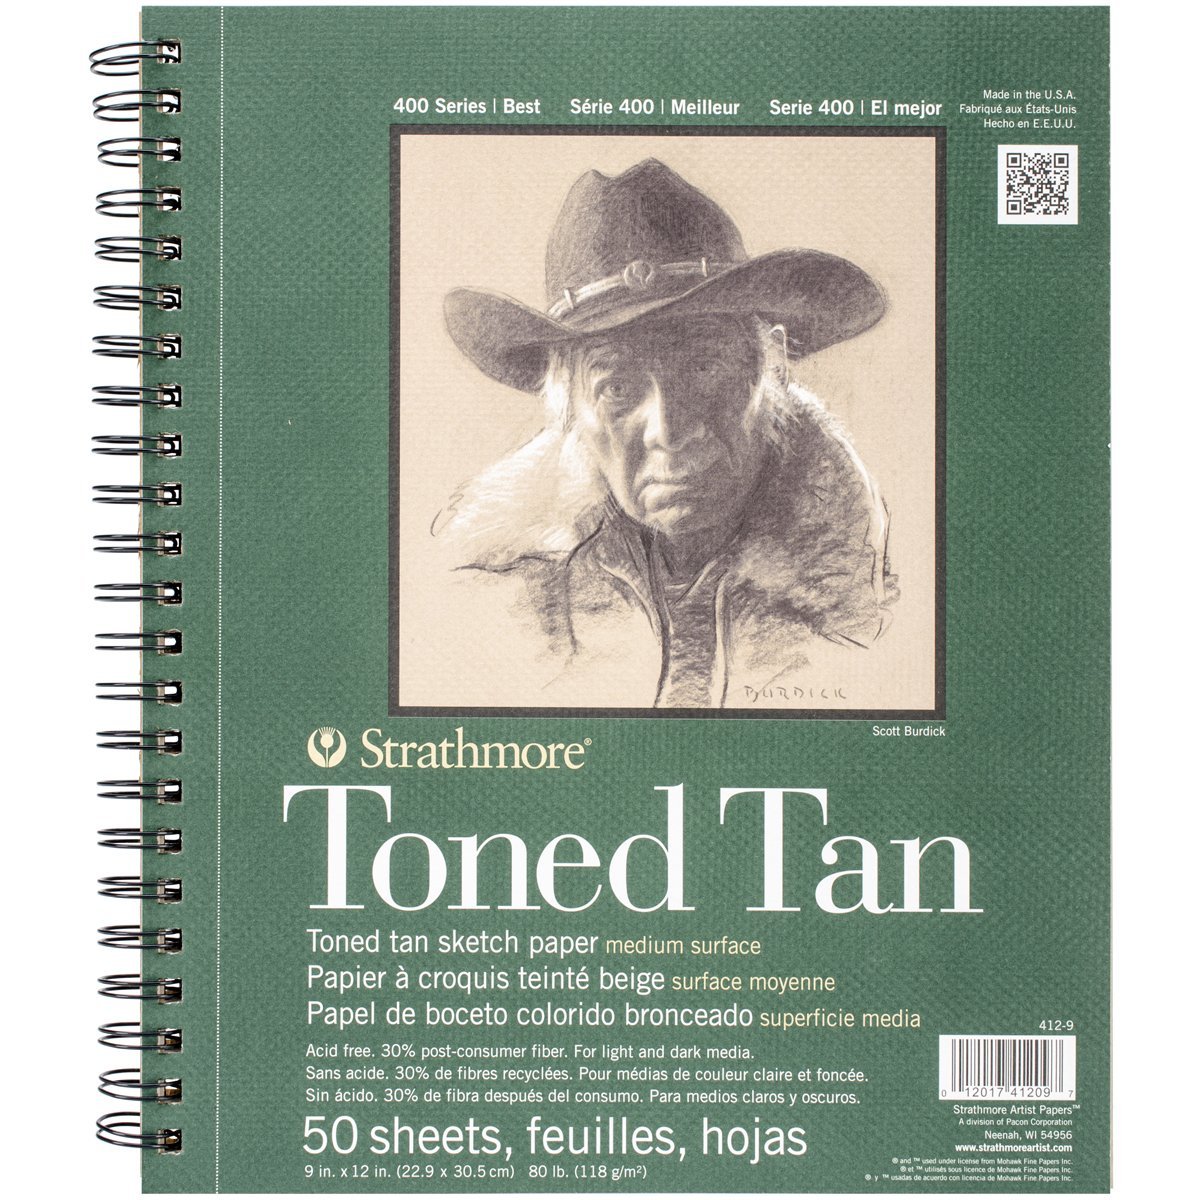 Strathmore 412-9 Tan Drawing 400 Series Toned Sketch Pad, 9 x12 , 50 Count